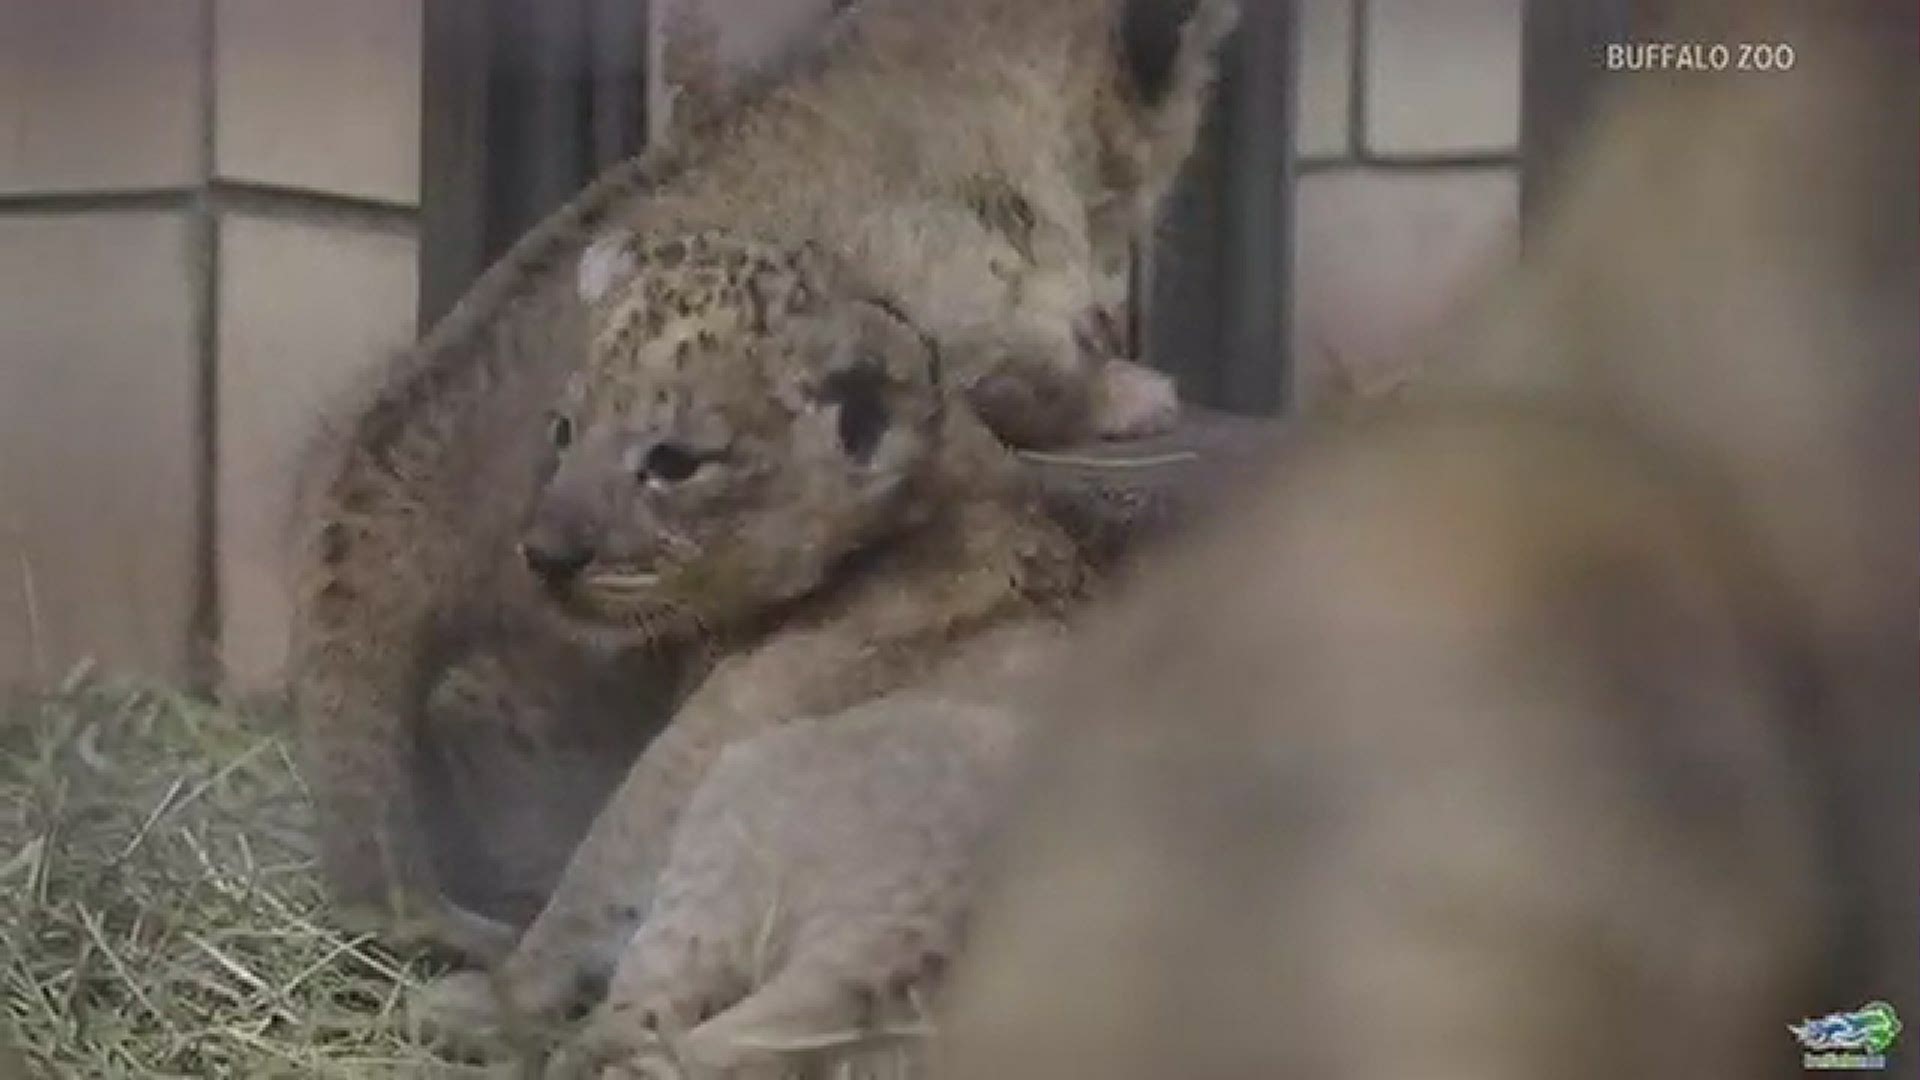 The Buffalo Zoo's baby lions could make their public debut in about a month. (video provided courtesty the Buffalo Zoo)